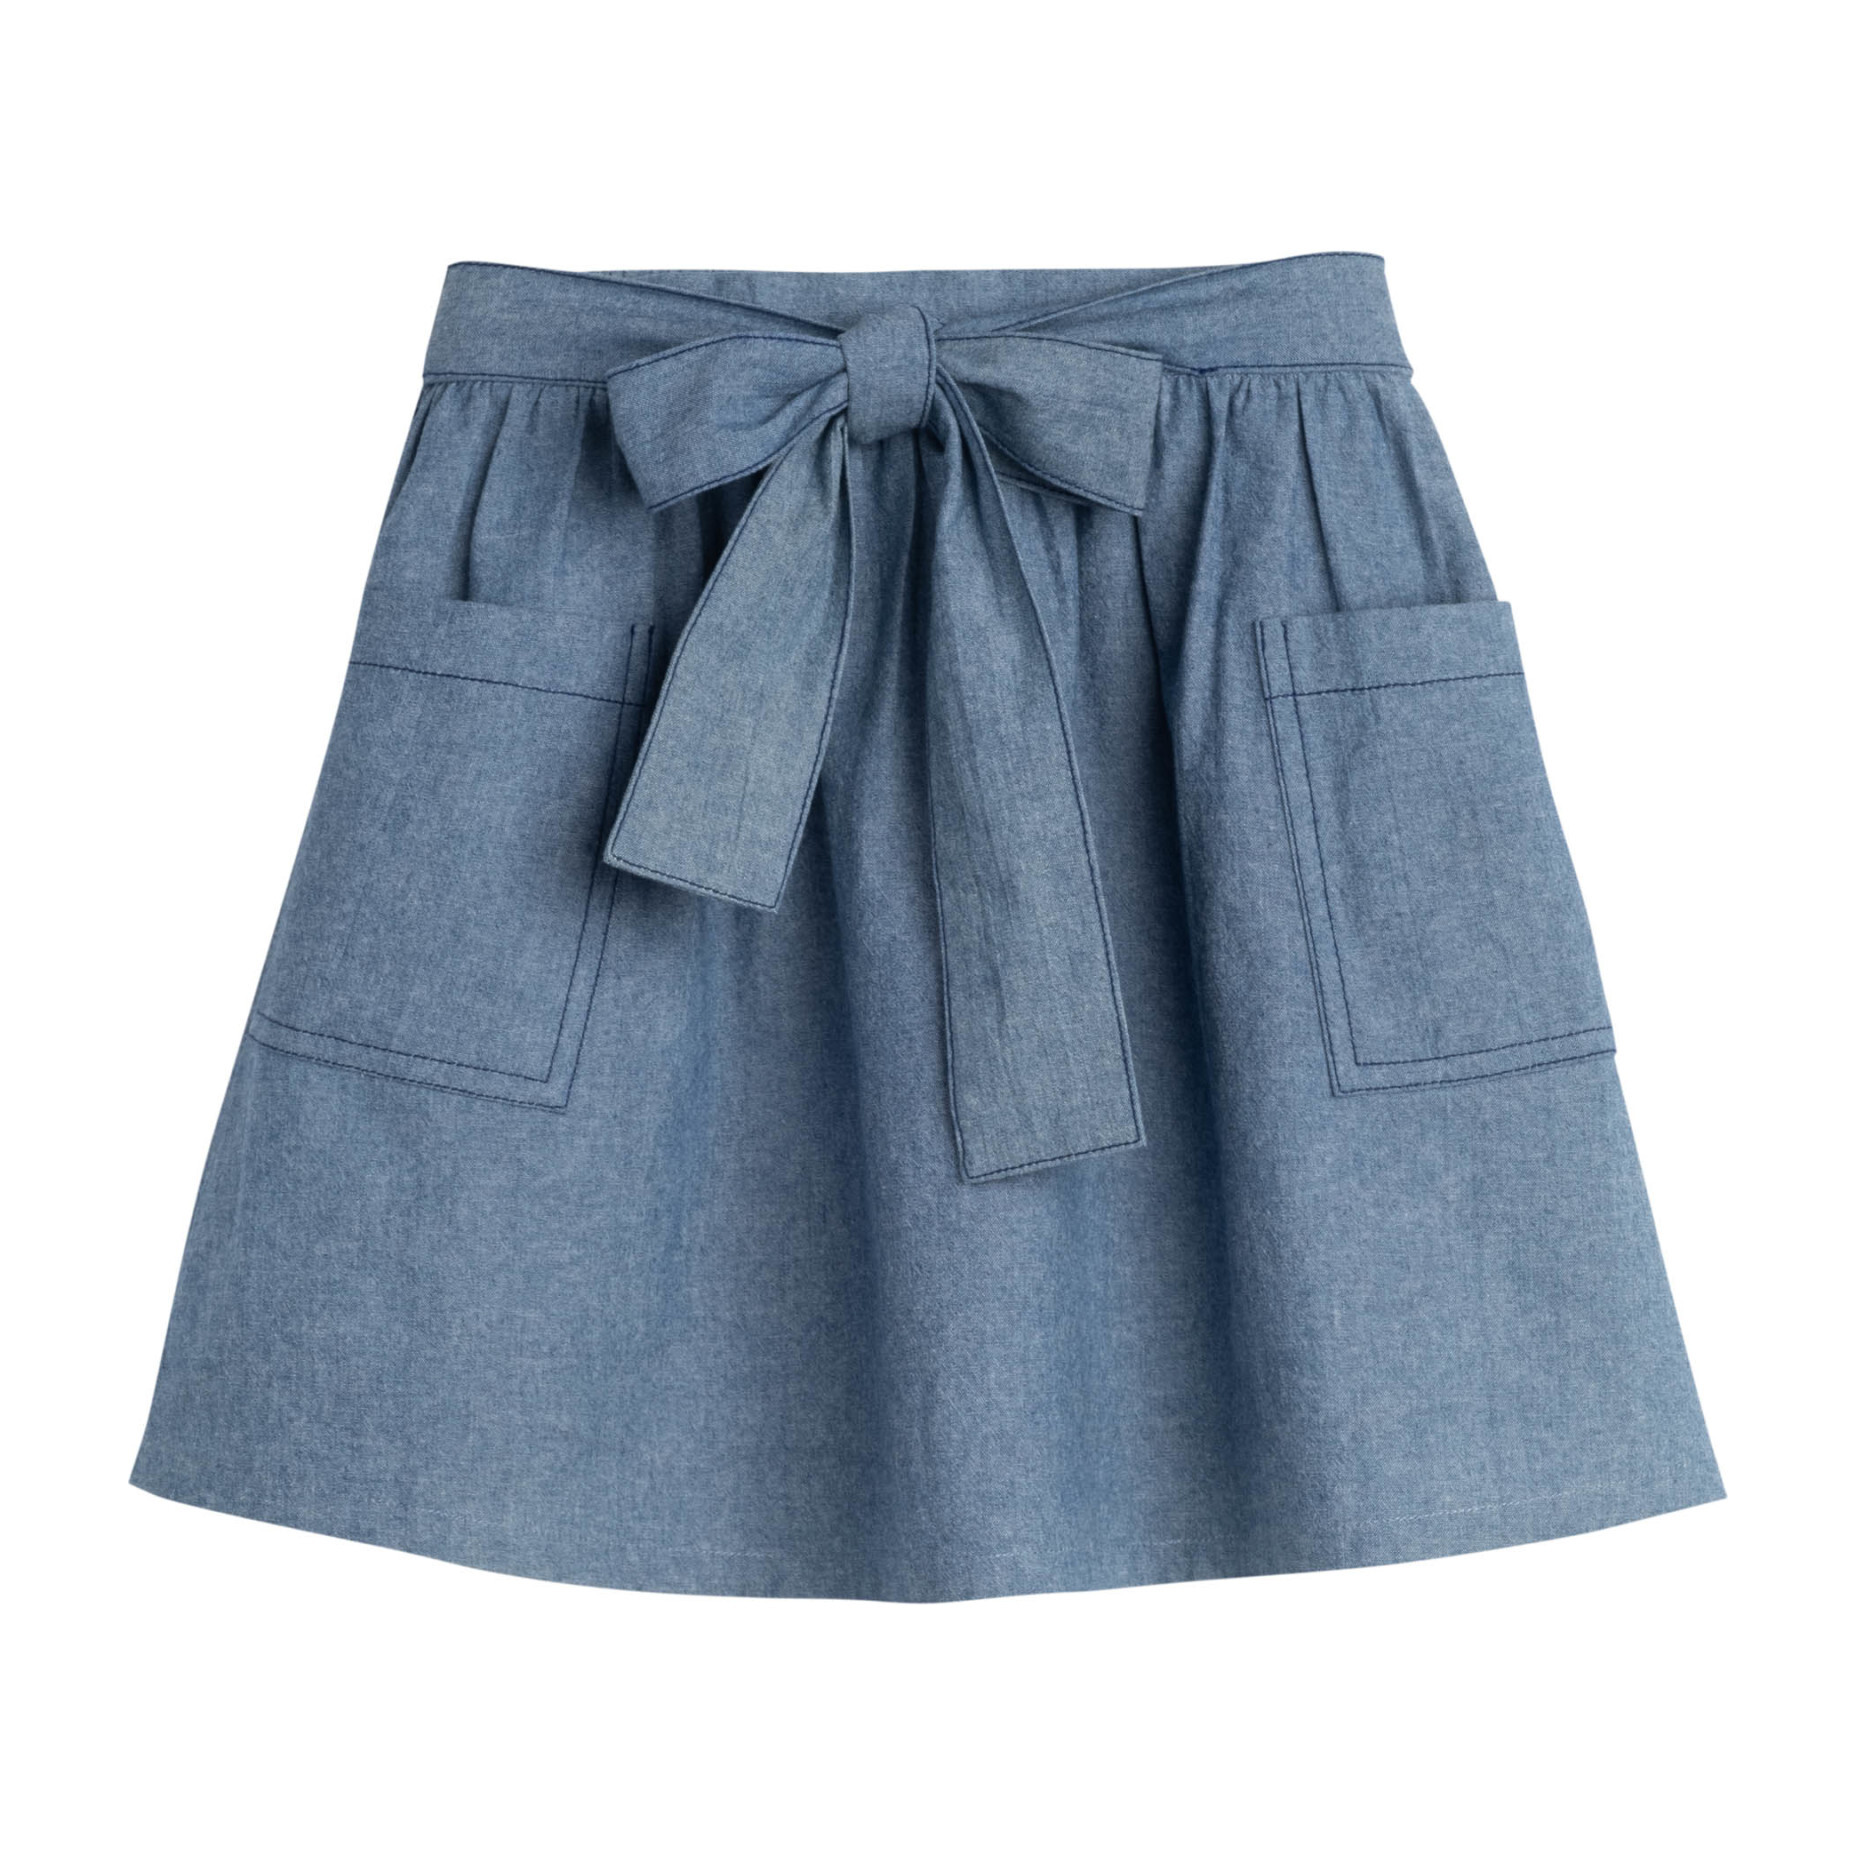 Willow Bow Skirt, Chambray - What's New Trending Exclusives - Maisonette